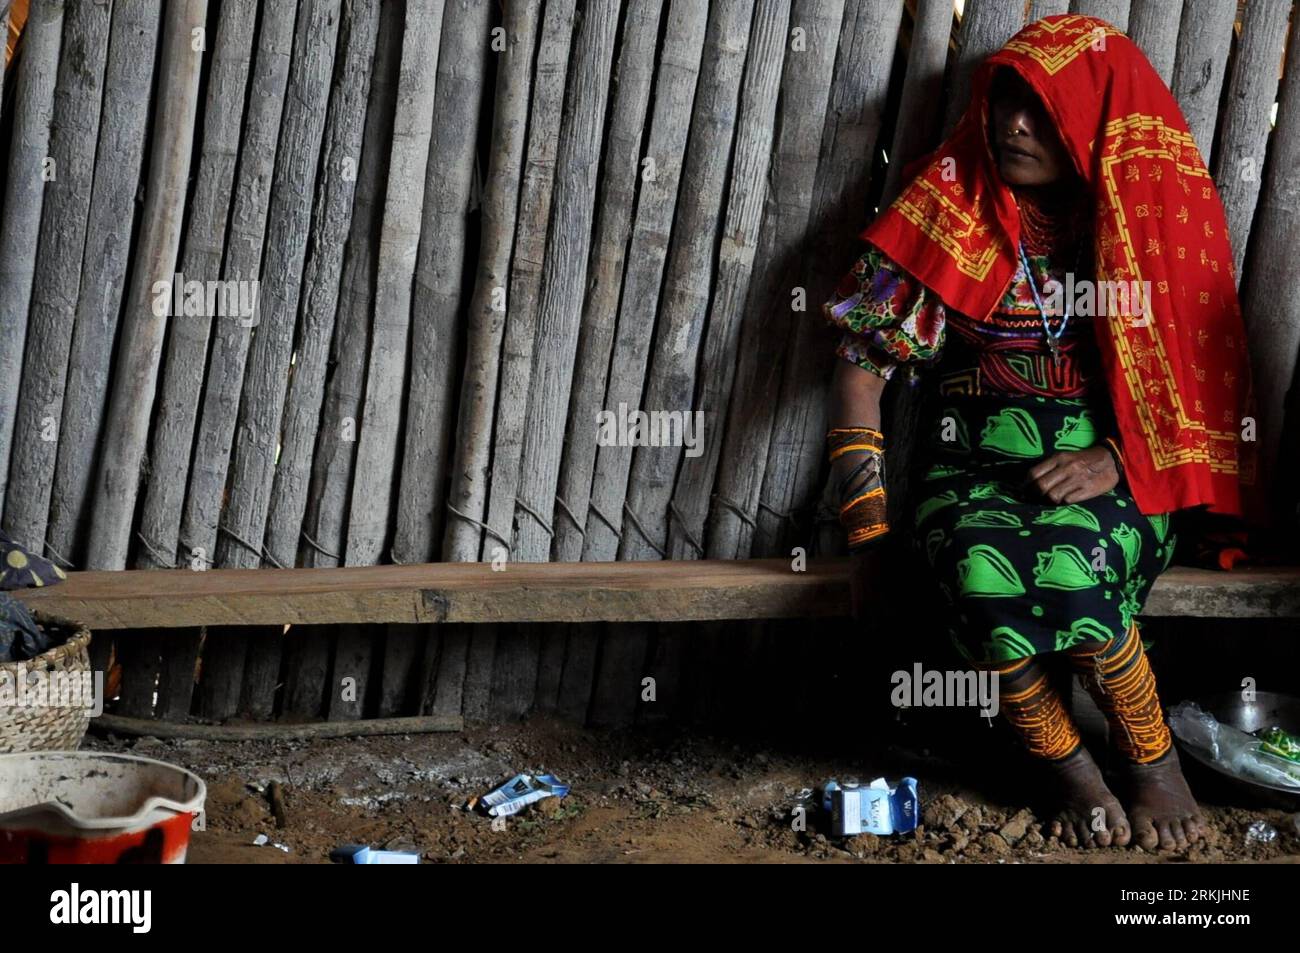 Bildnummer: 56138807  Datum: 30.09.2011  Copyright: imago/Xinhua (111001) -- ICARTI, Oct. 1, 2011 (Xinhua) -- A Kuna woman dressed in traditional costumes of Mola is seen in the region of Icarti, Madugandi, Panama, on Sept. 30, 2011. Kuna is an indigenous group of located mostly in Panama and Colombia s border areas. They inhabited in three regions, including Wargandi, Madugandi and Kuna Yala. Kuna has a population of some 40,000, and lives mostly on hunting and fishing. (Xinhua/Mauricio Valenzuela) (py) PANAMA-ICARTI-KUNA PUBLICATIONxNOTxINxCHN Gesellschaft Land Leute Indigene Ureinwohner Fra Stock Photo